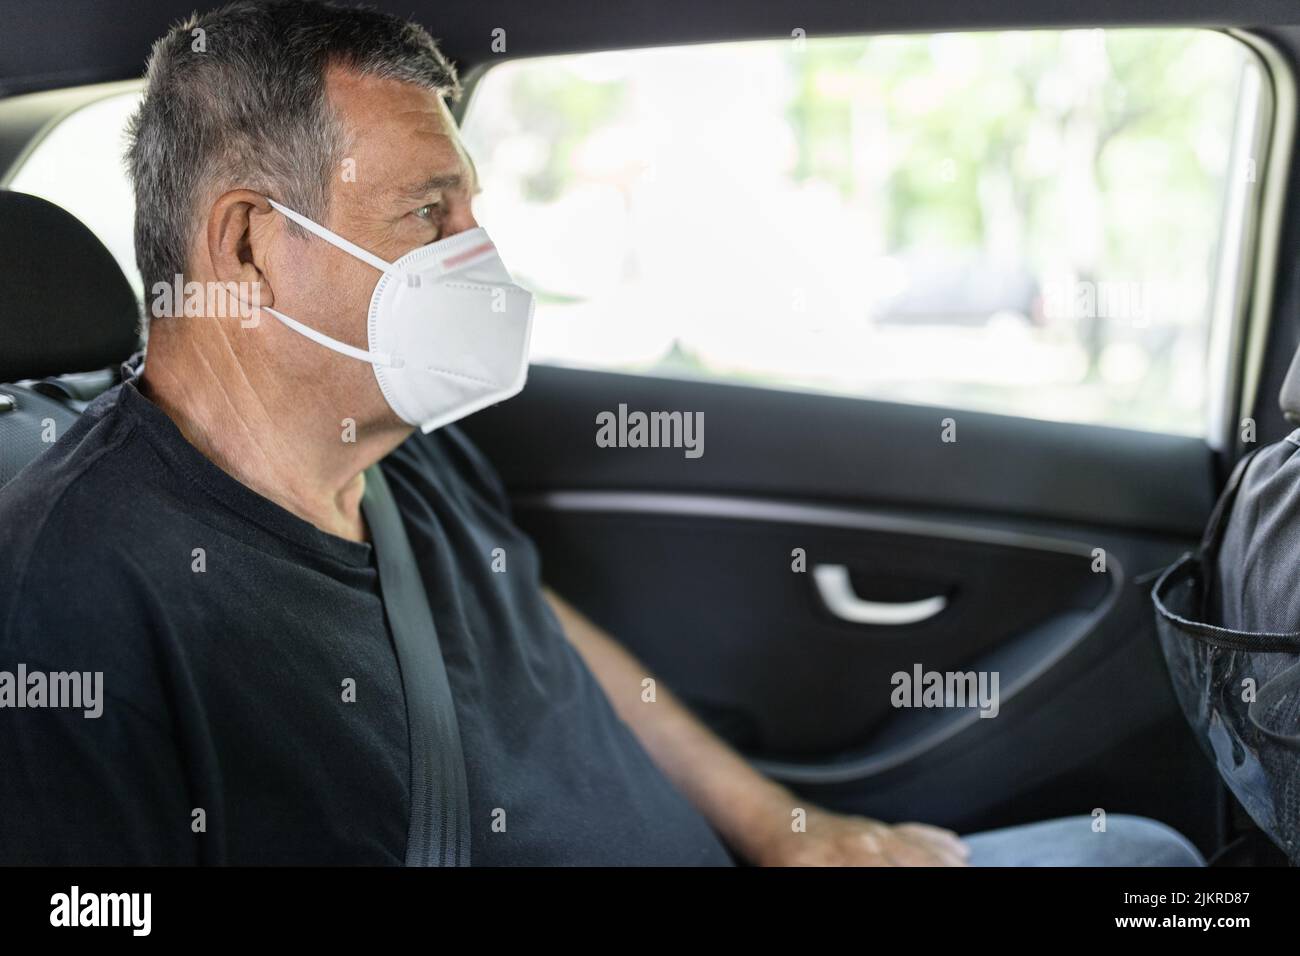 Senior in his 70s sitting at the back of car wearing a face mask for protection against corona virus Stock Photo